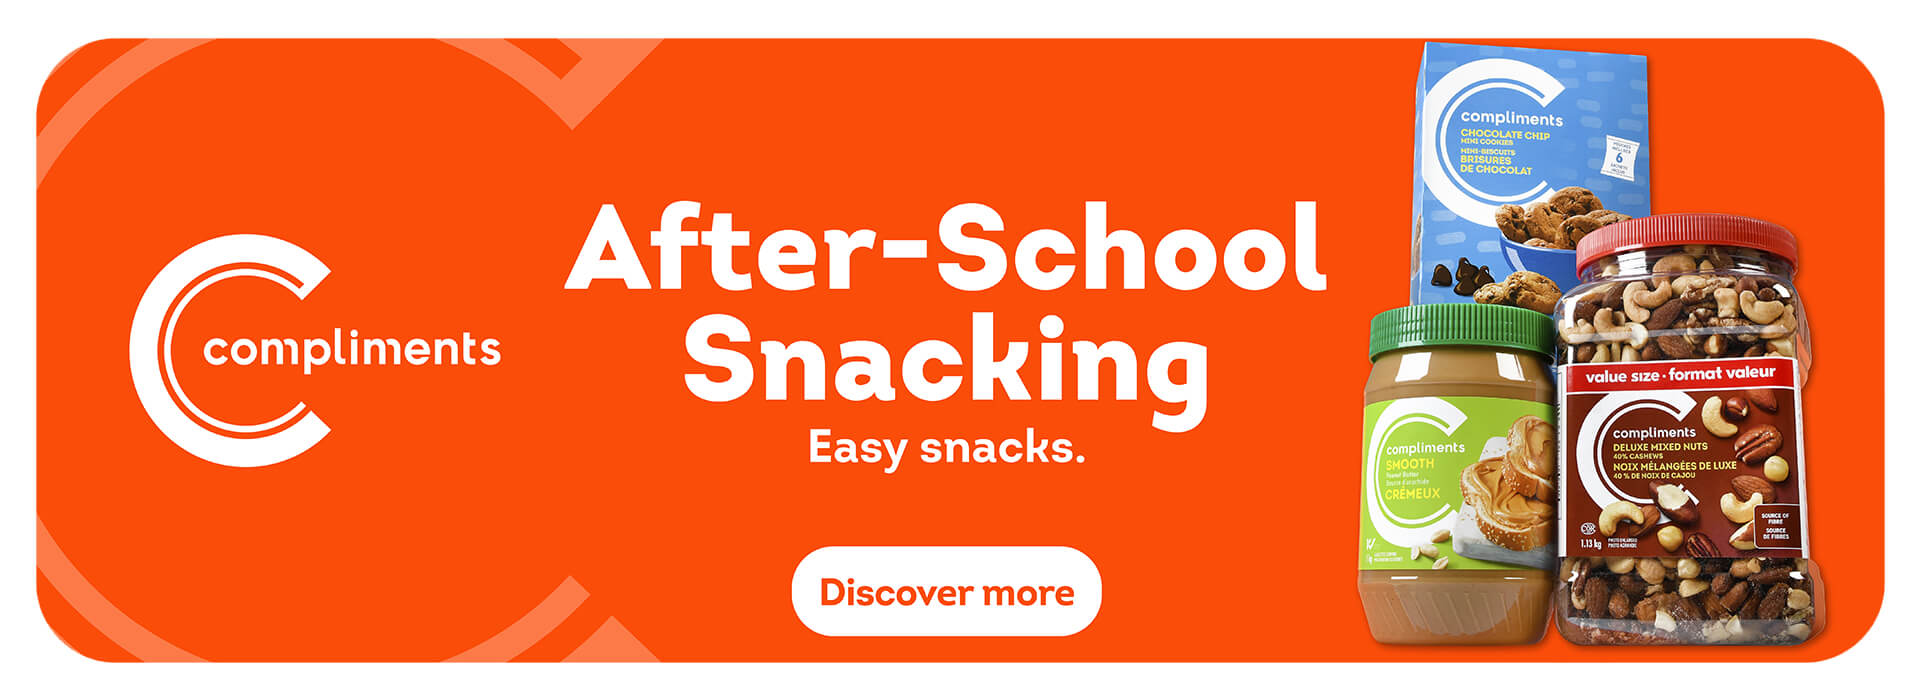 Compliments products on an Orange background. Headline: After-School Snacking, Copy: Easy snacks. Products featured are Compliments Chocolate Chip Mini Cookies, Compliments Smooth Peanut Butter & Compliments Deluxe Mixed Nuts.